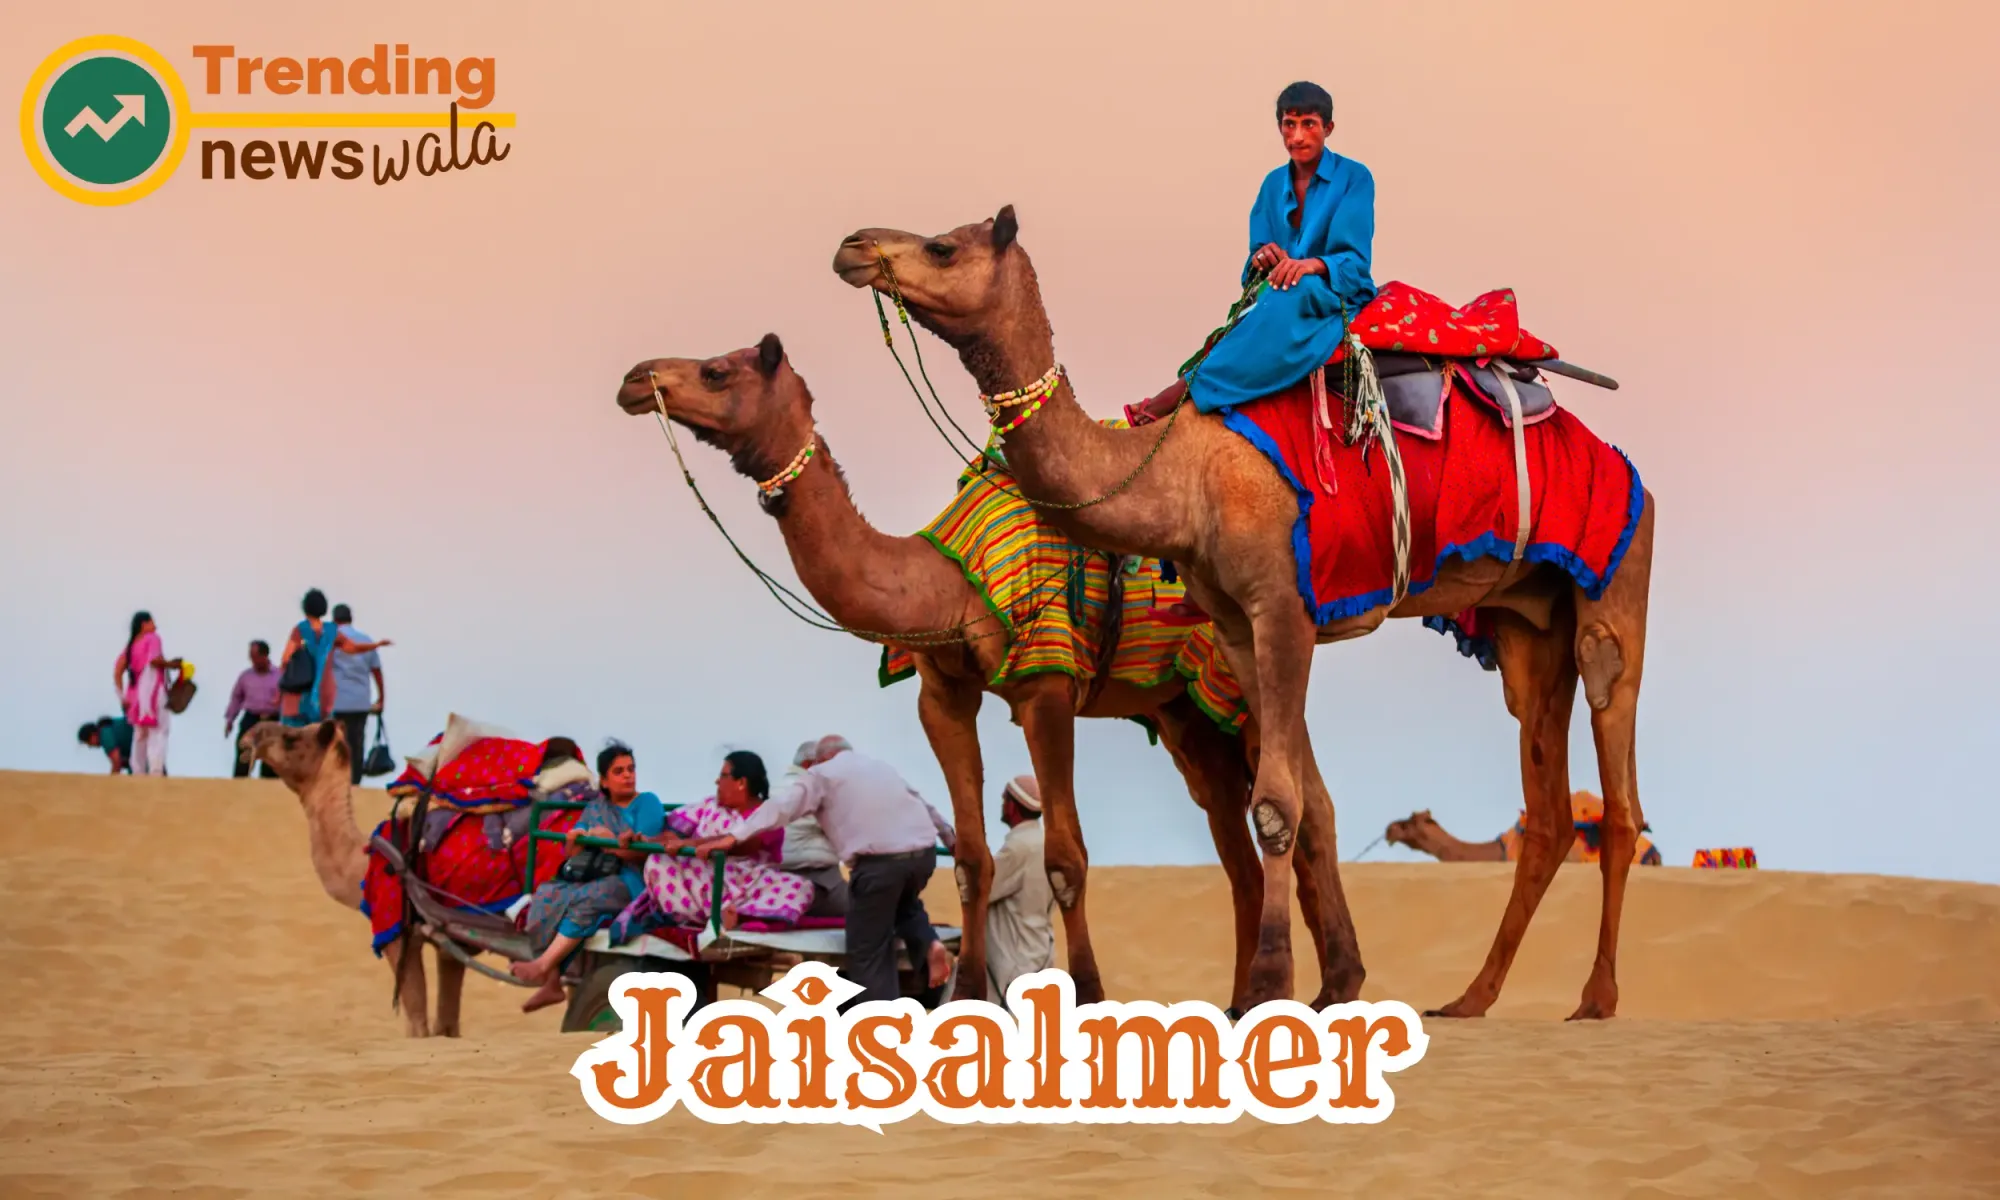 Jaisalmer, often referred to as the "Golden City," is a historic city located in the western Indian